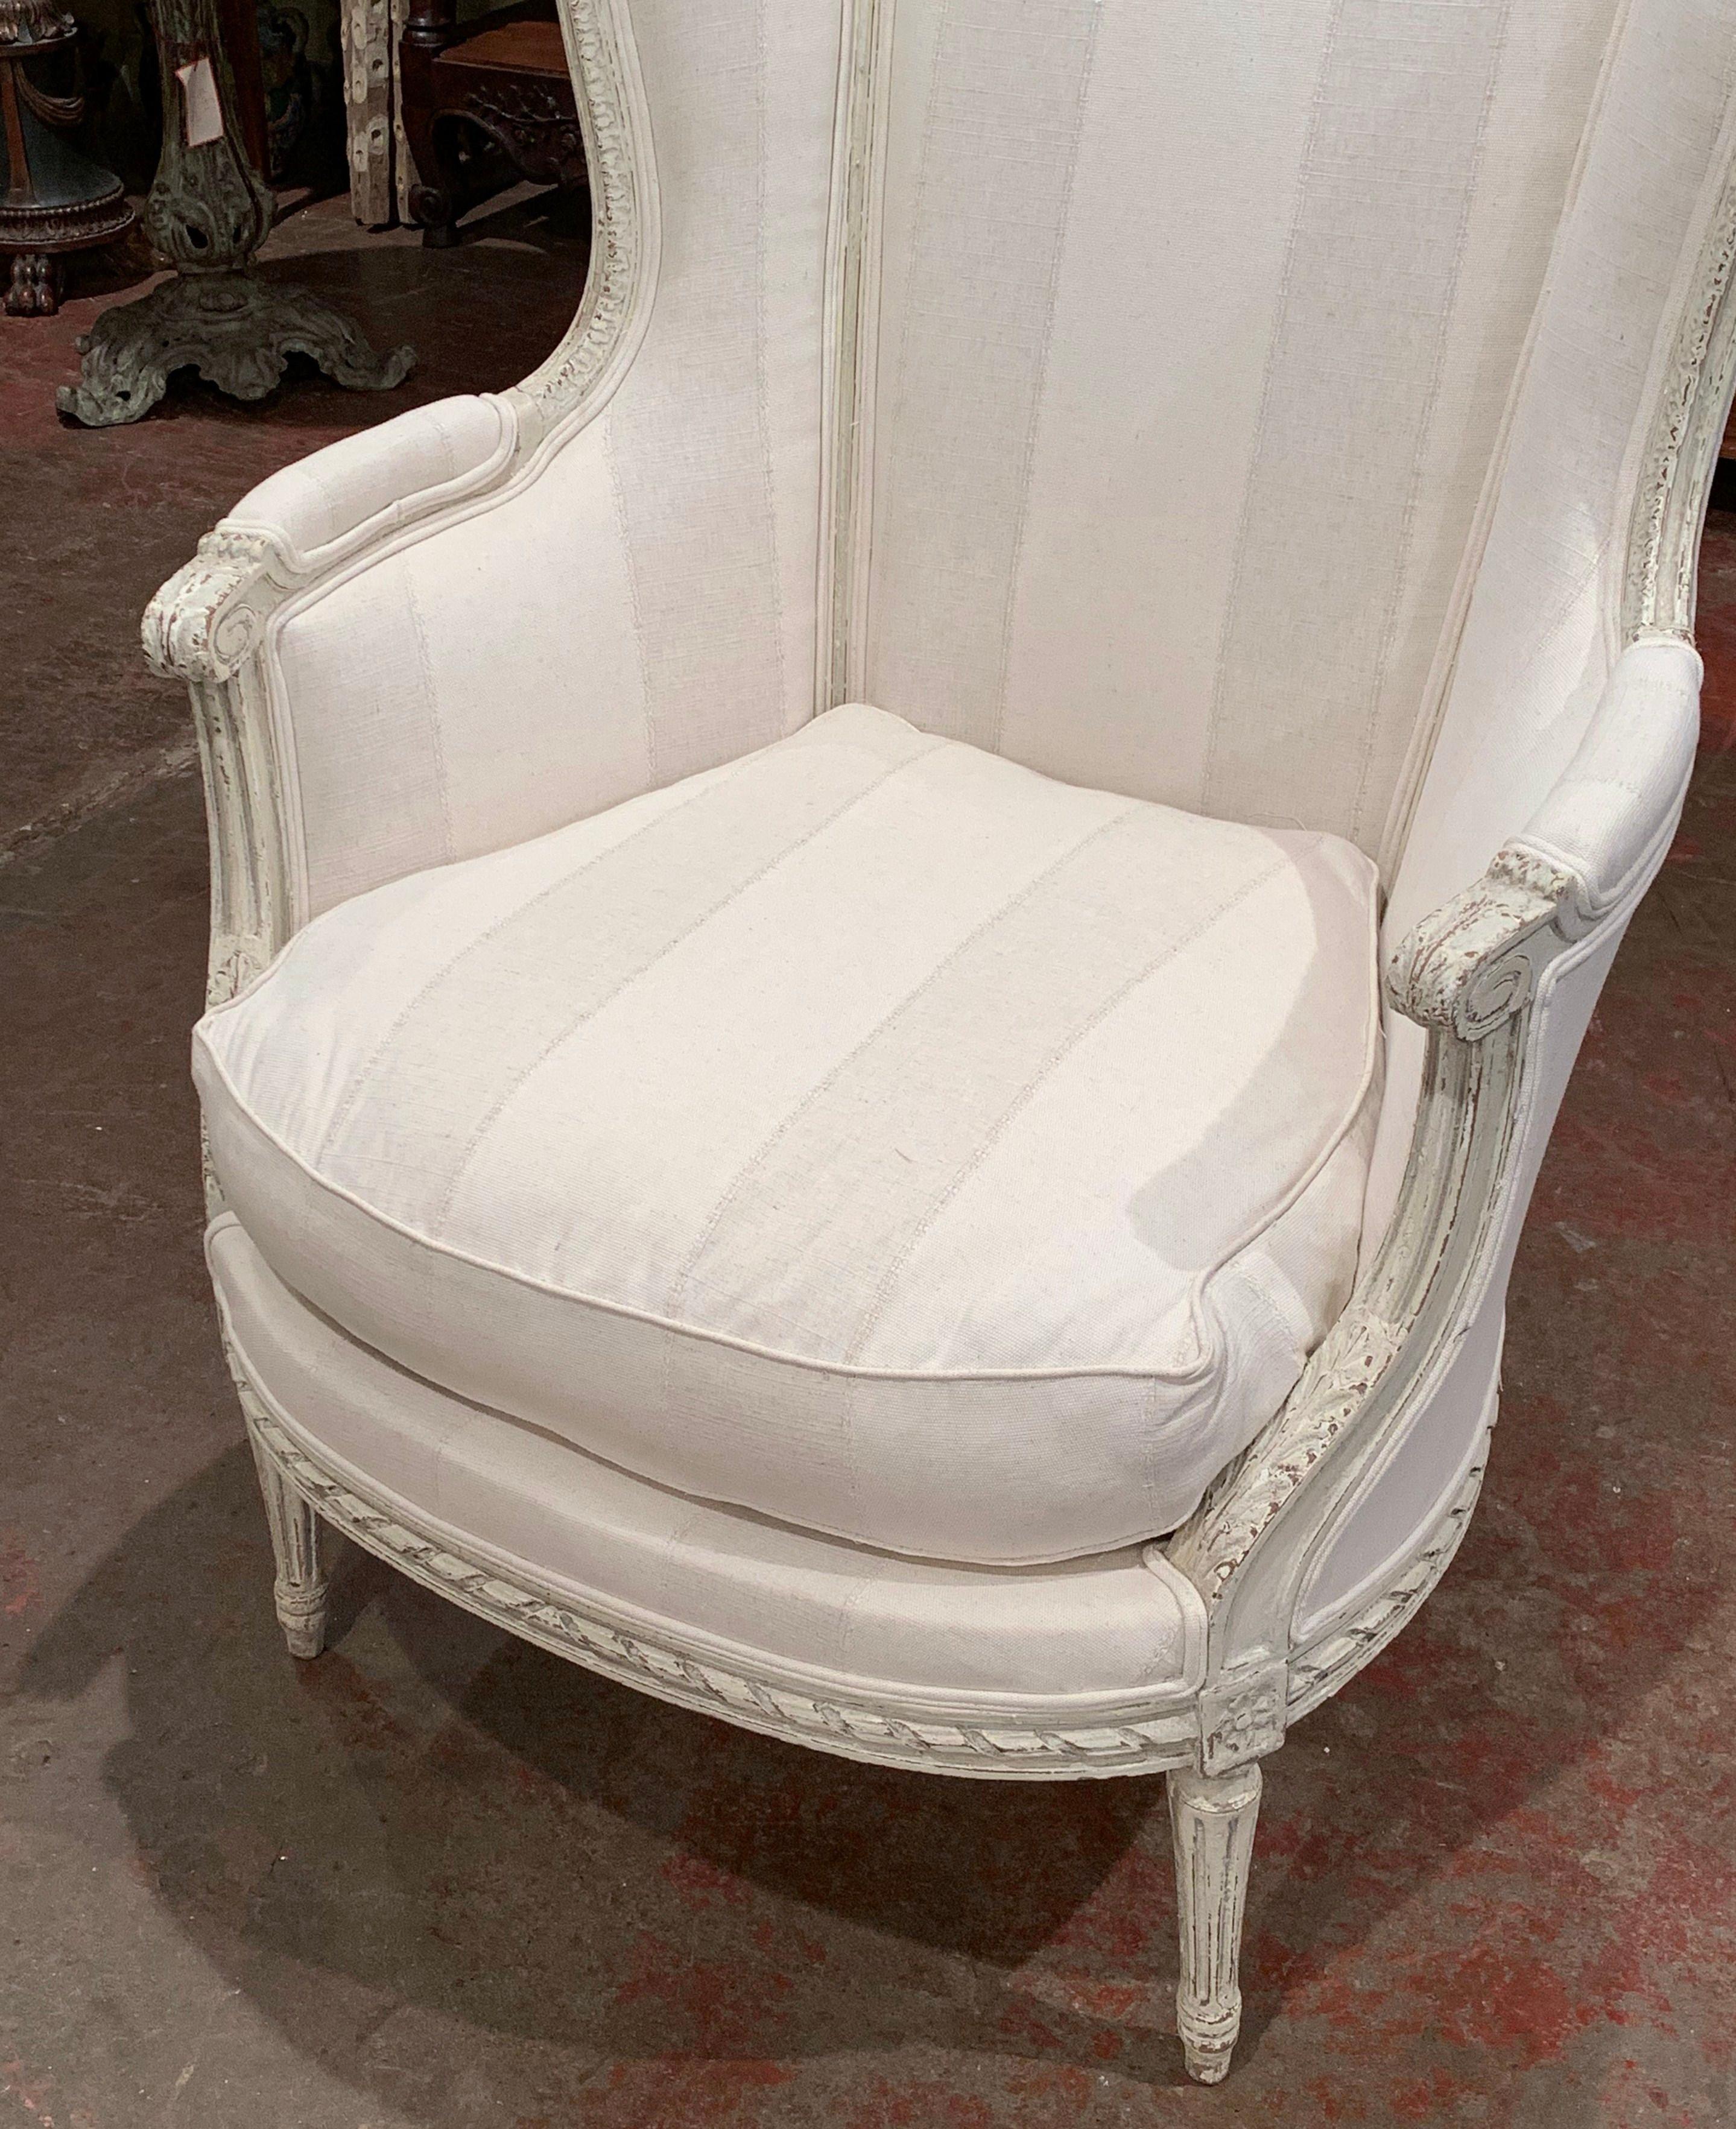 Decorate a bedroom or den with this elegant antique armchair. Crafted in France circa 1880, the chair sits on delicate tapered legs over a carved apron. The tall curved back is embellished with ear shaped sides and the armrests are decorated with